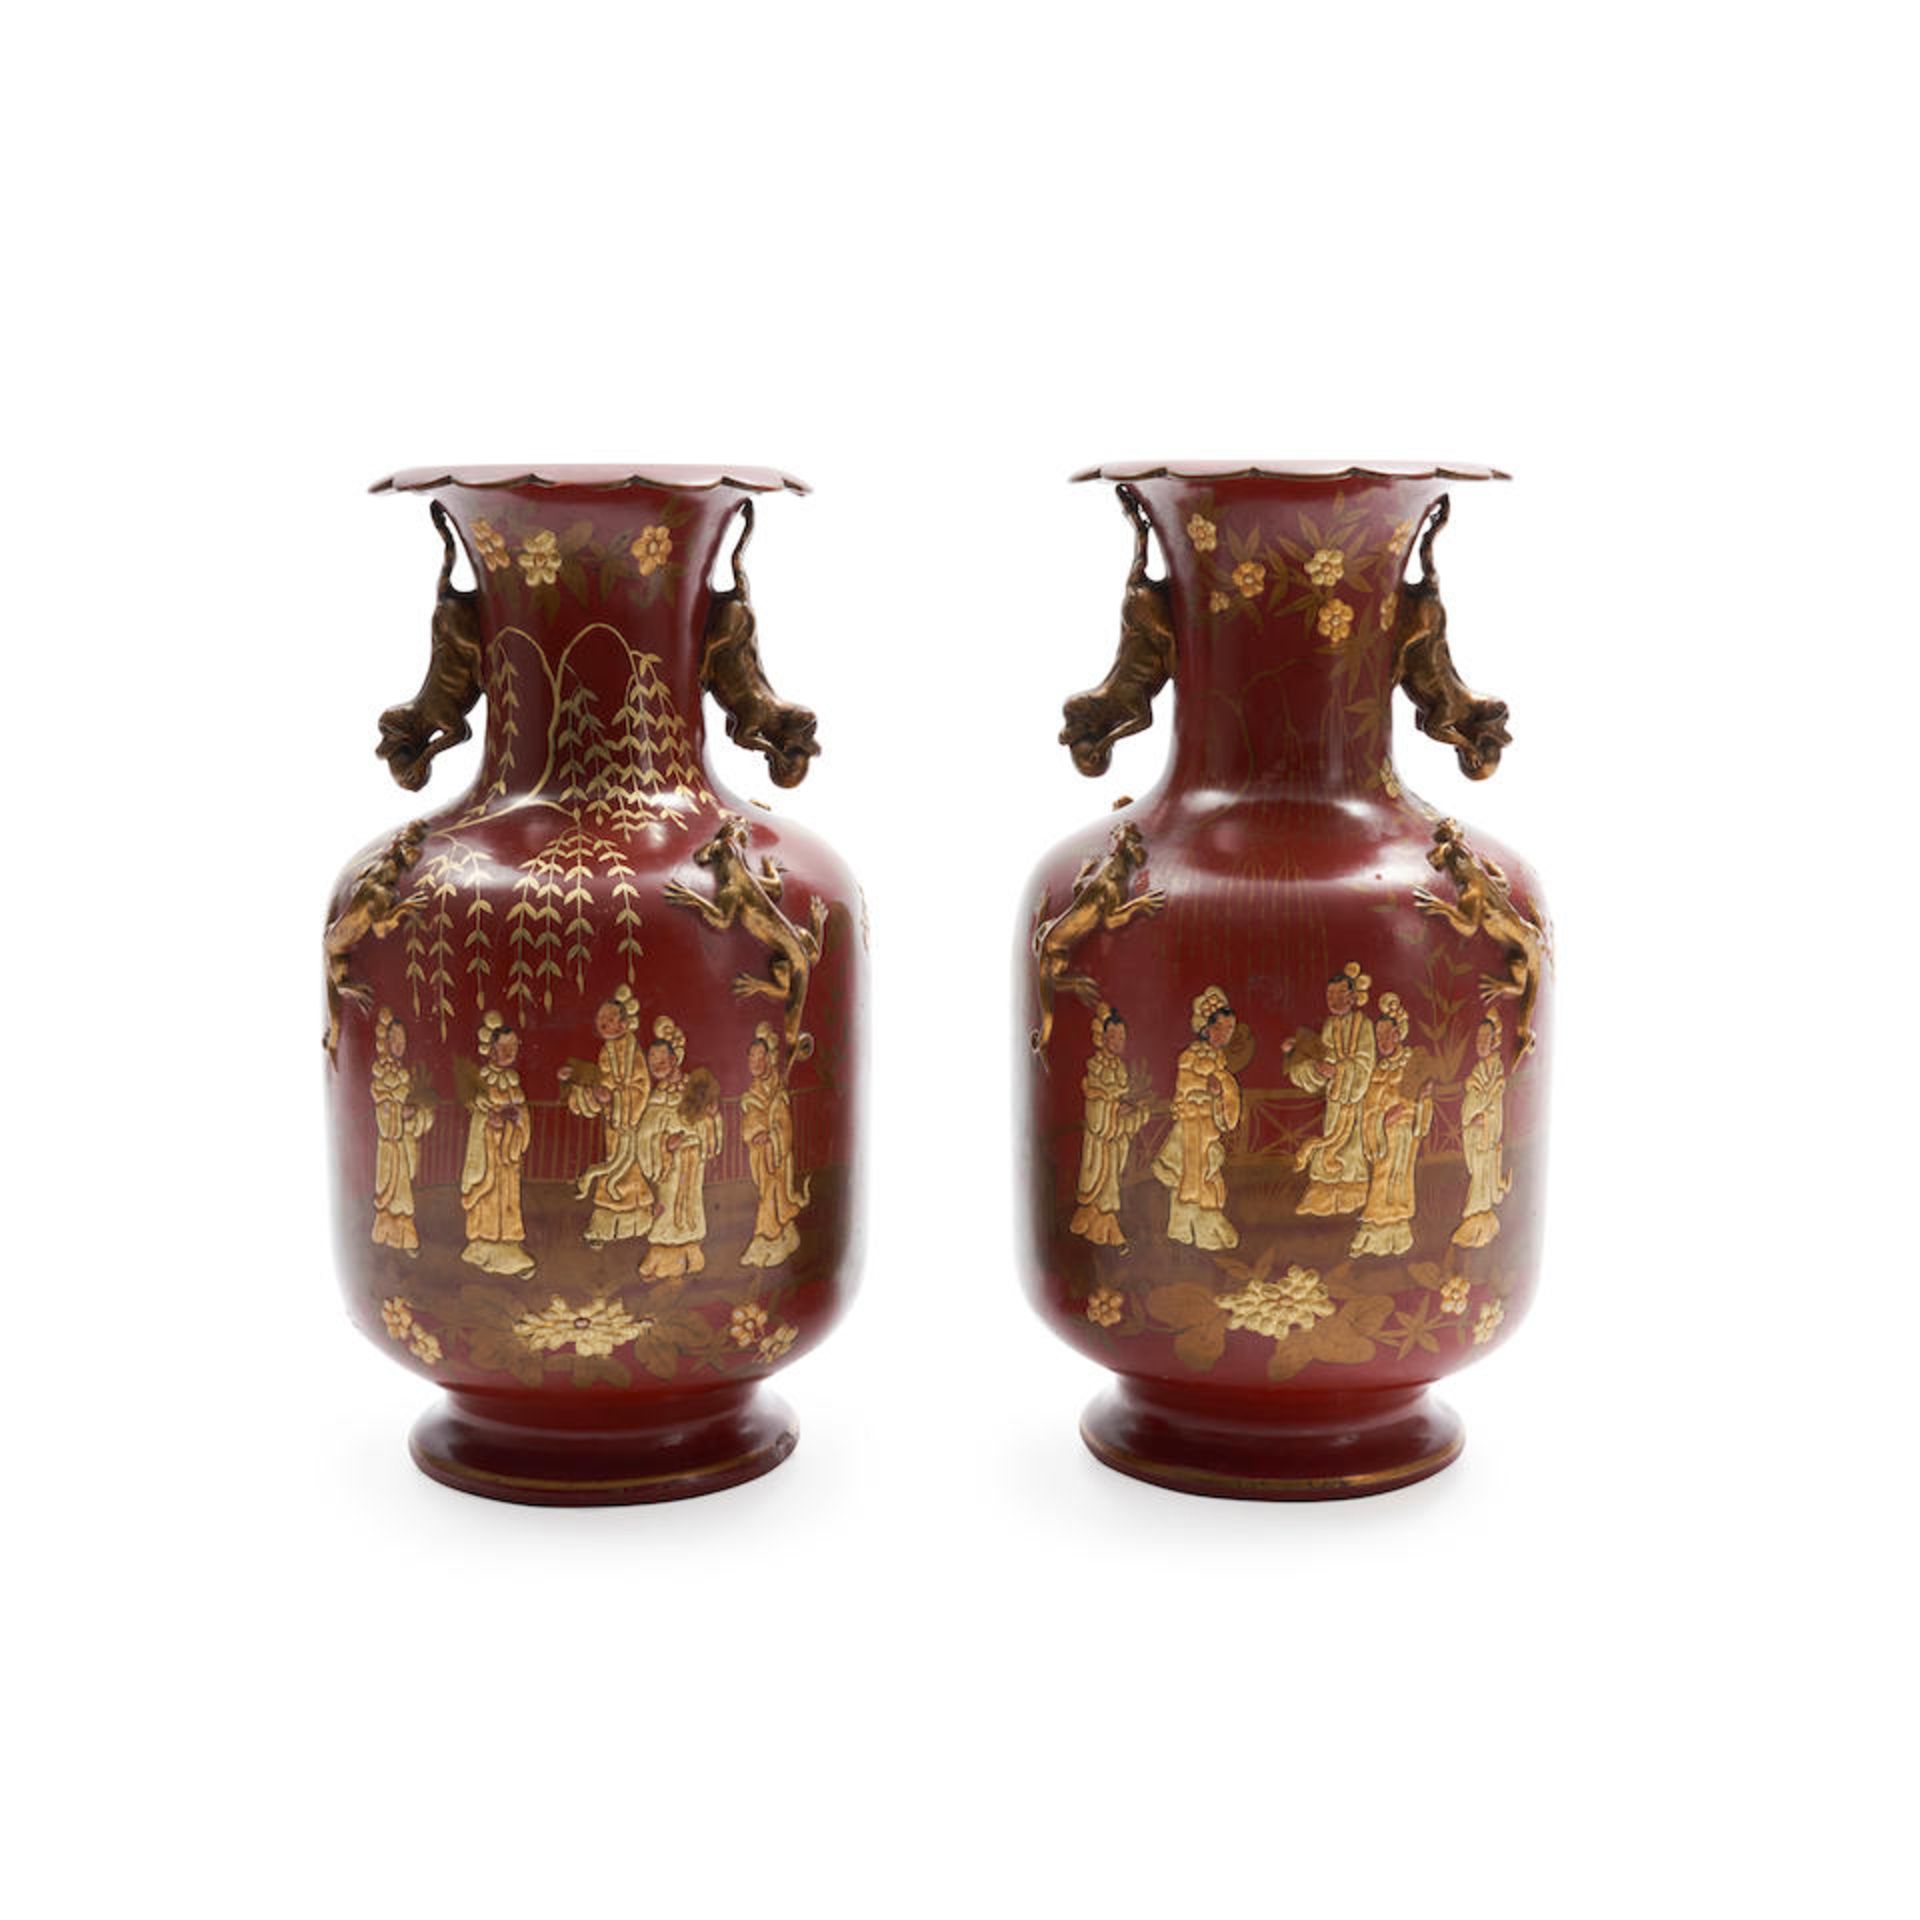 PAIR OF RED LACQUERED CHINOISERIE DECORATED VASES